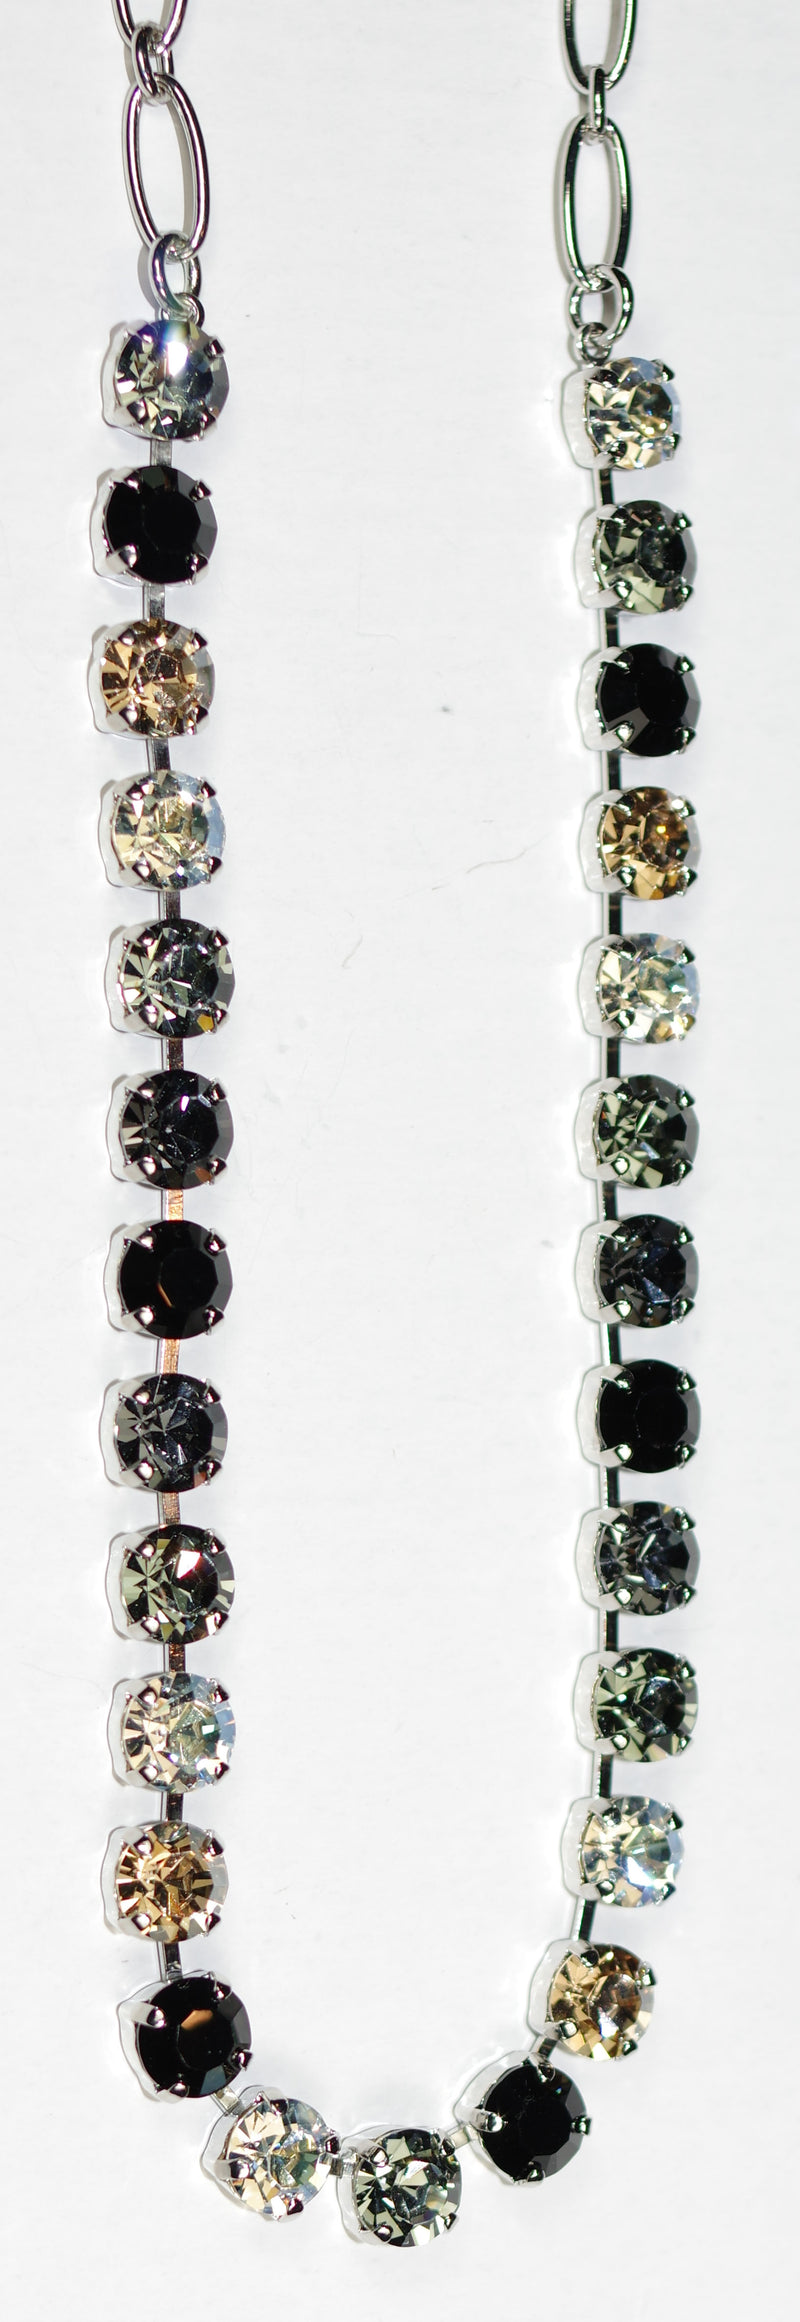 MARIANA NECKLACE BETTE BLACK ORCHID: taupe, black, amber, clear stones in silver rhodium setting, 17" adjustable chain